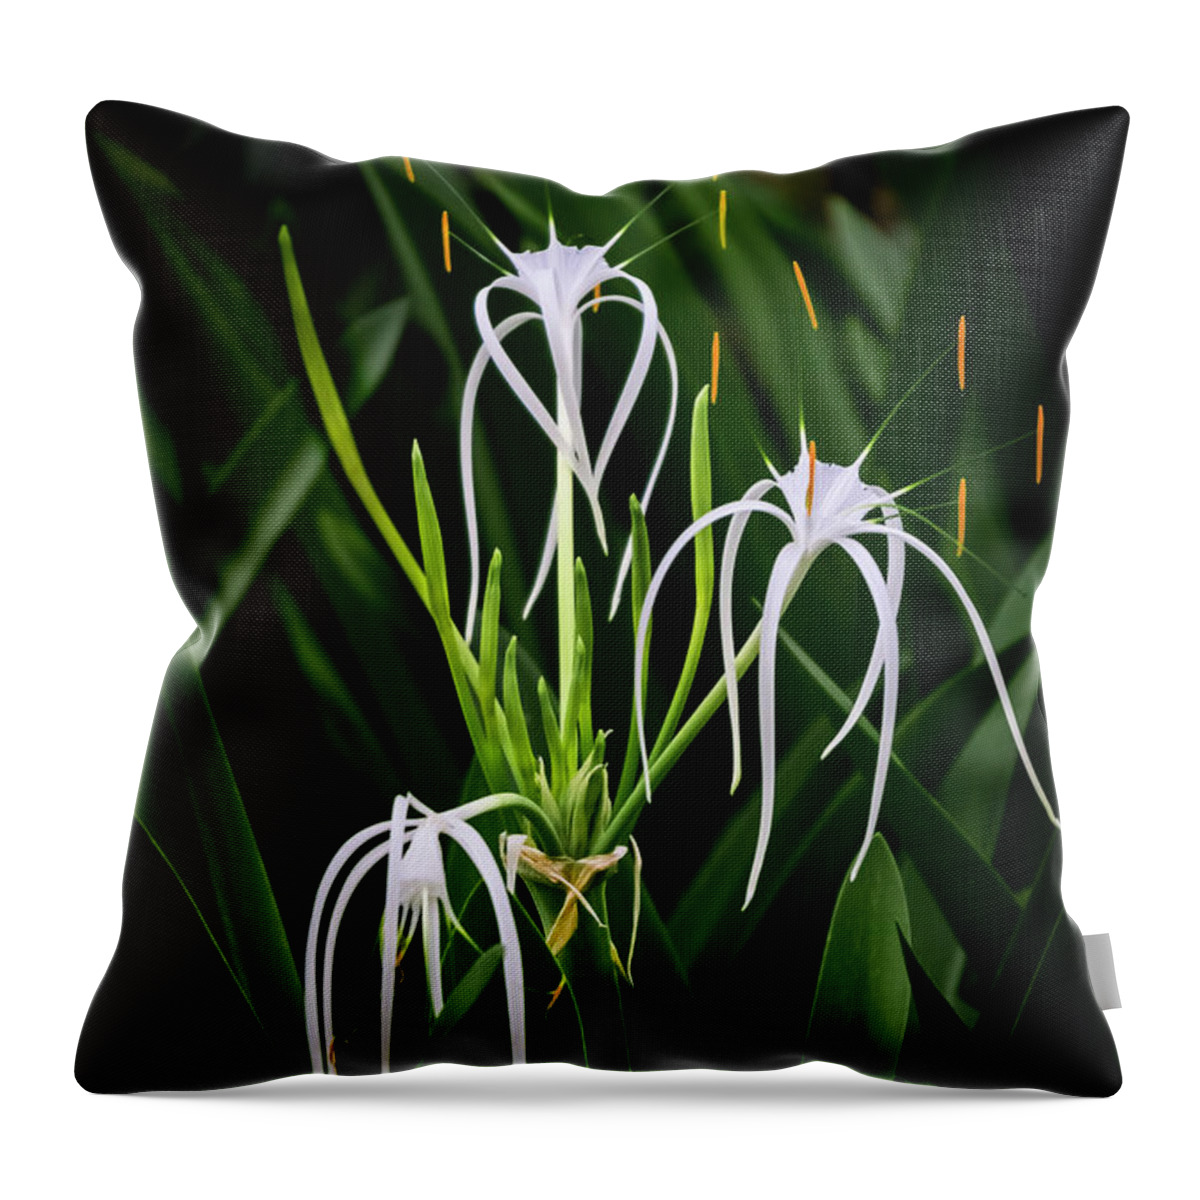 Flowers Throw Pillow featuring the photograph Blooming Poetry 4 by Silvia Marcoschamer